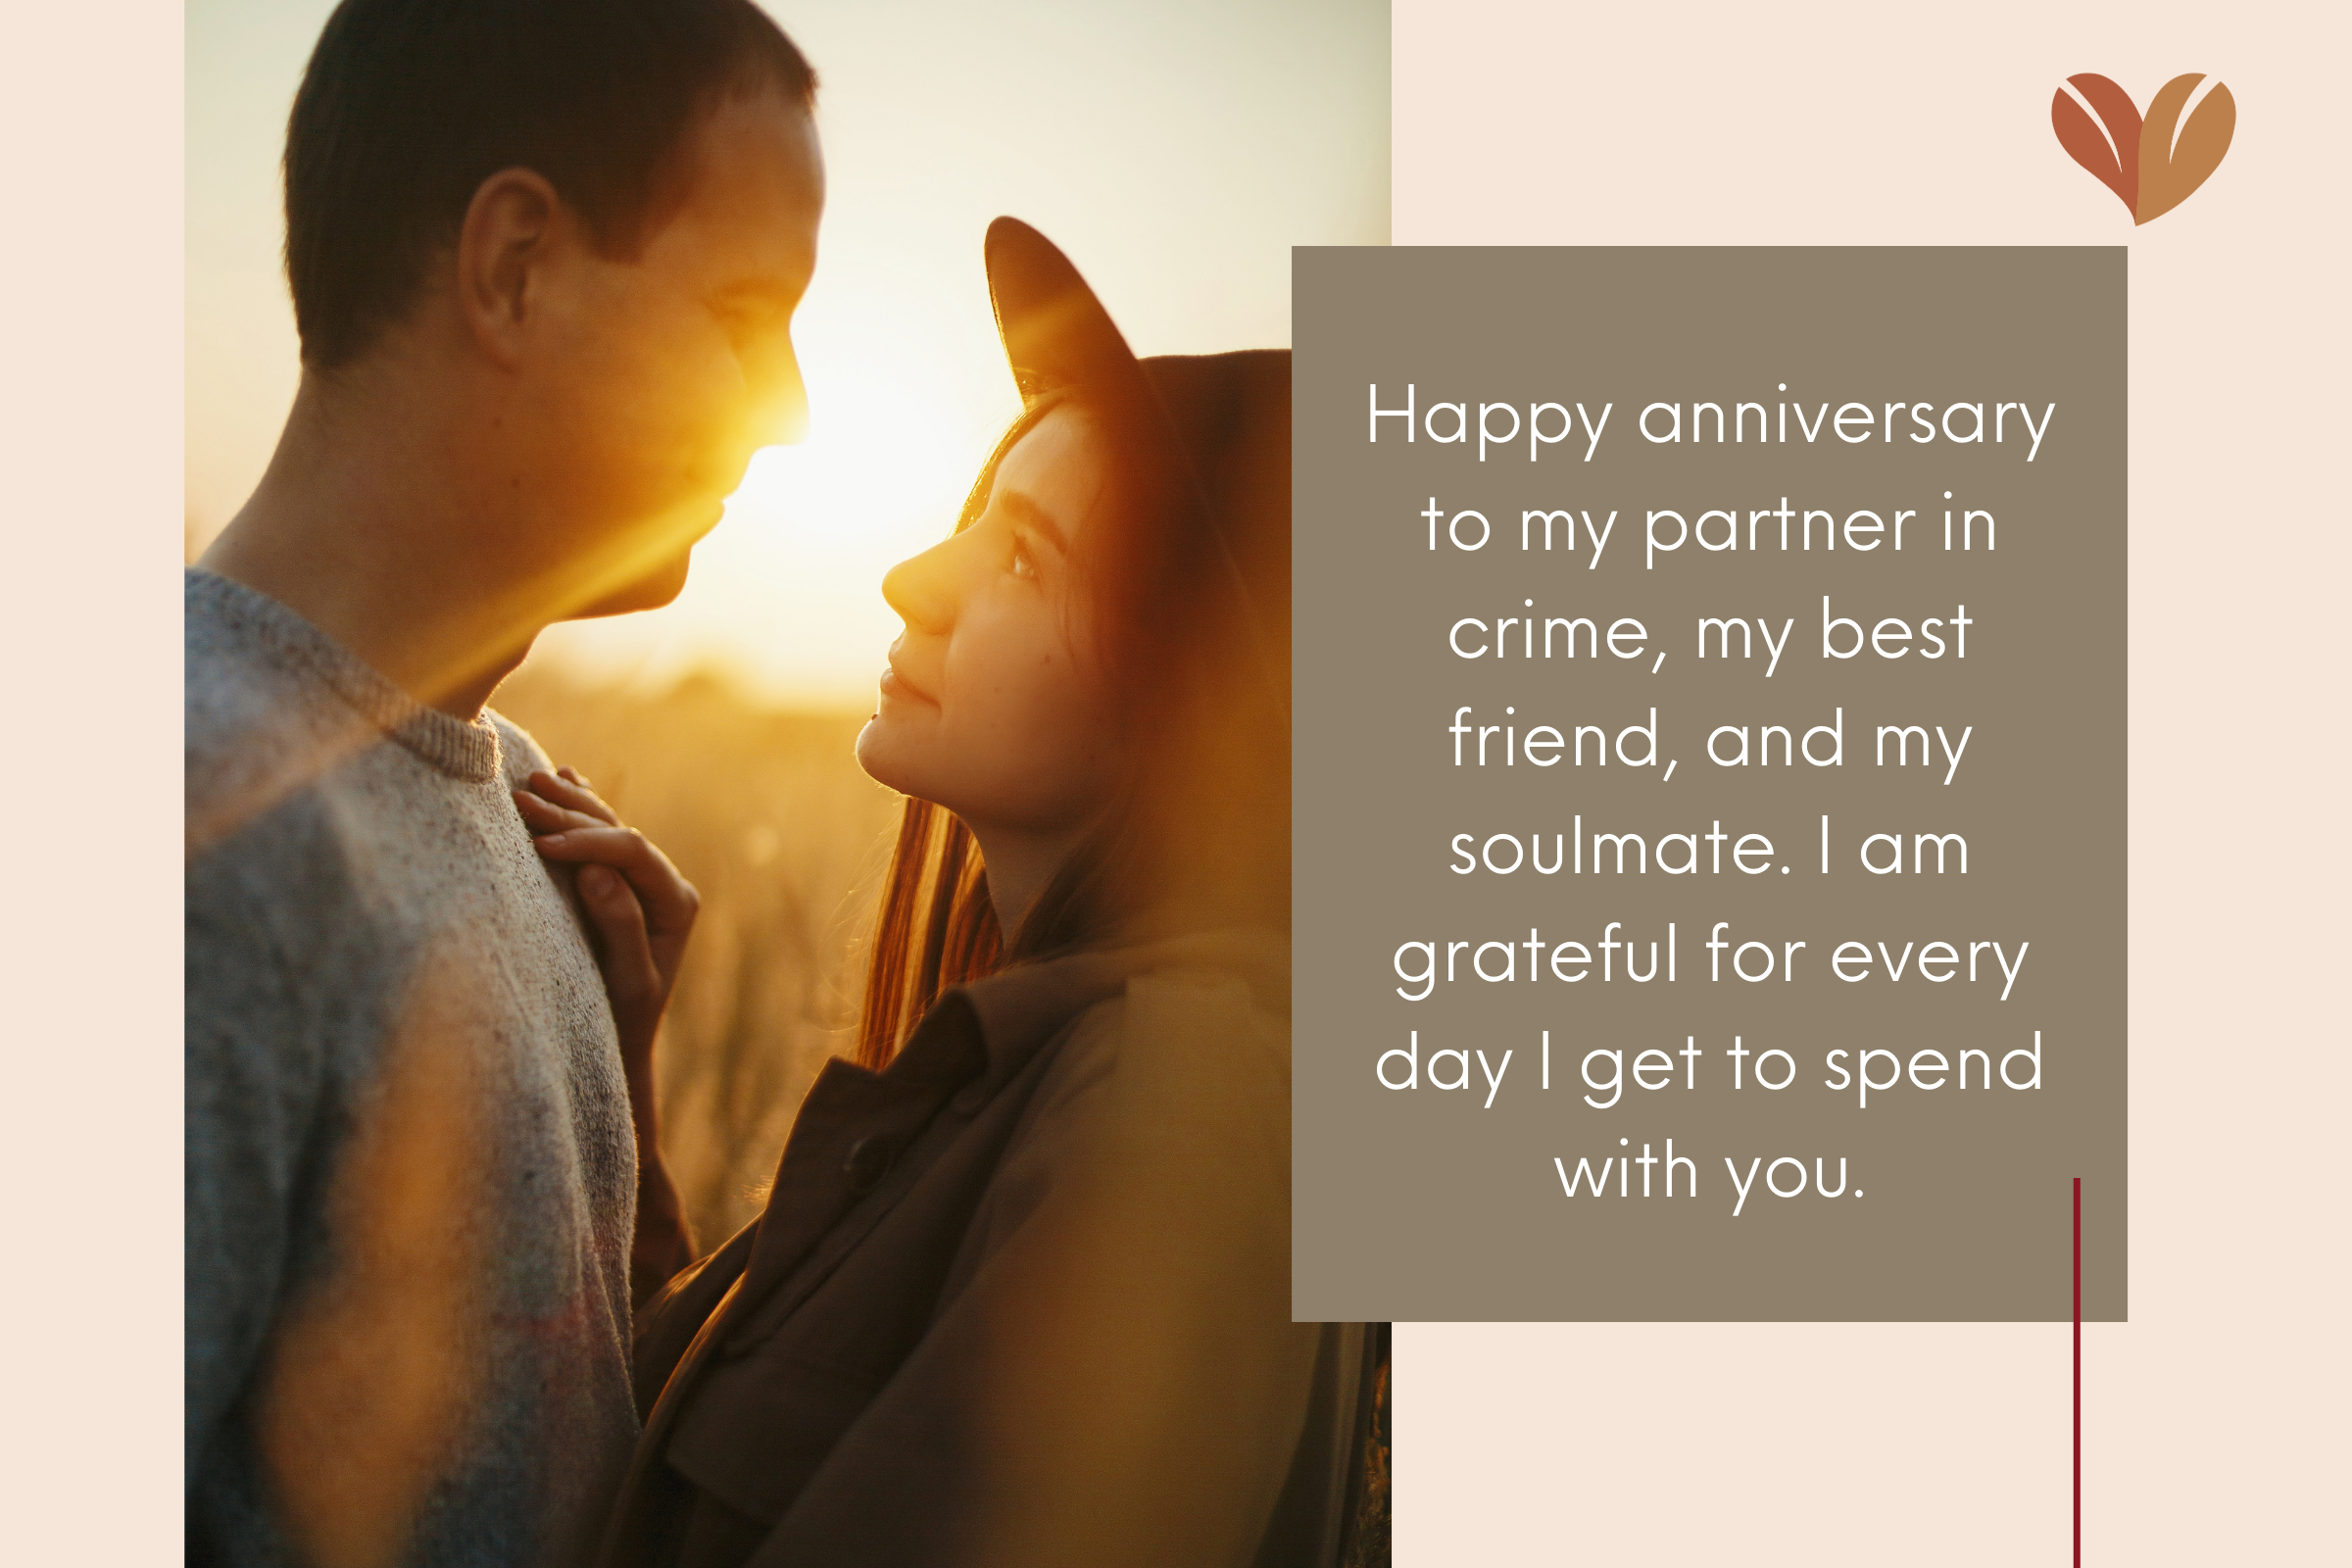 Anniversary quotes for husbands will show how much he means to you